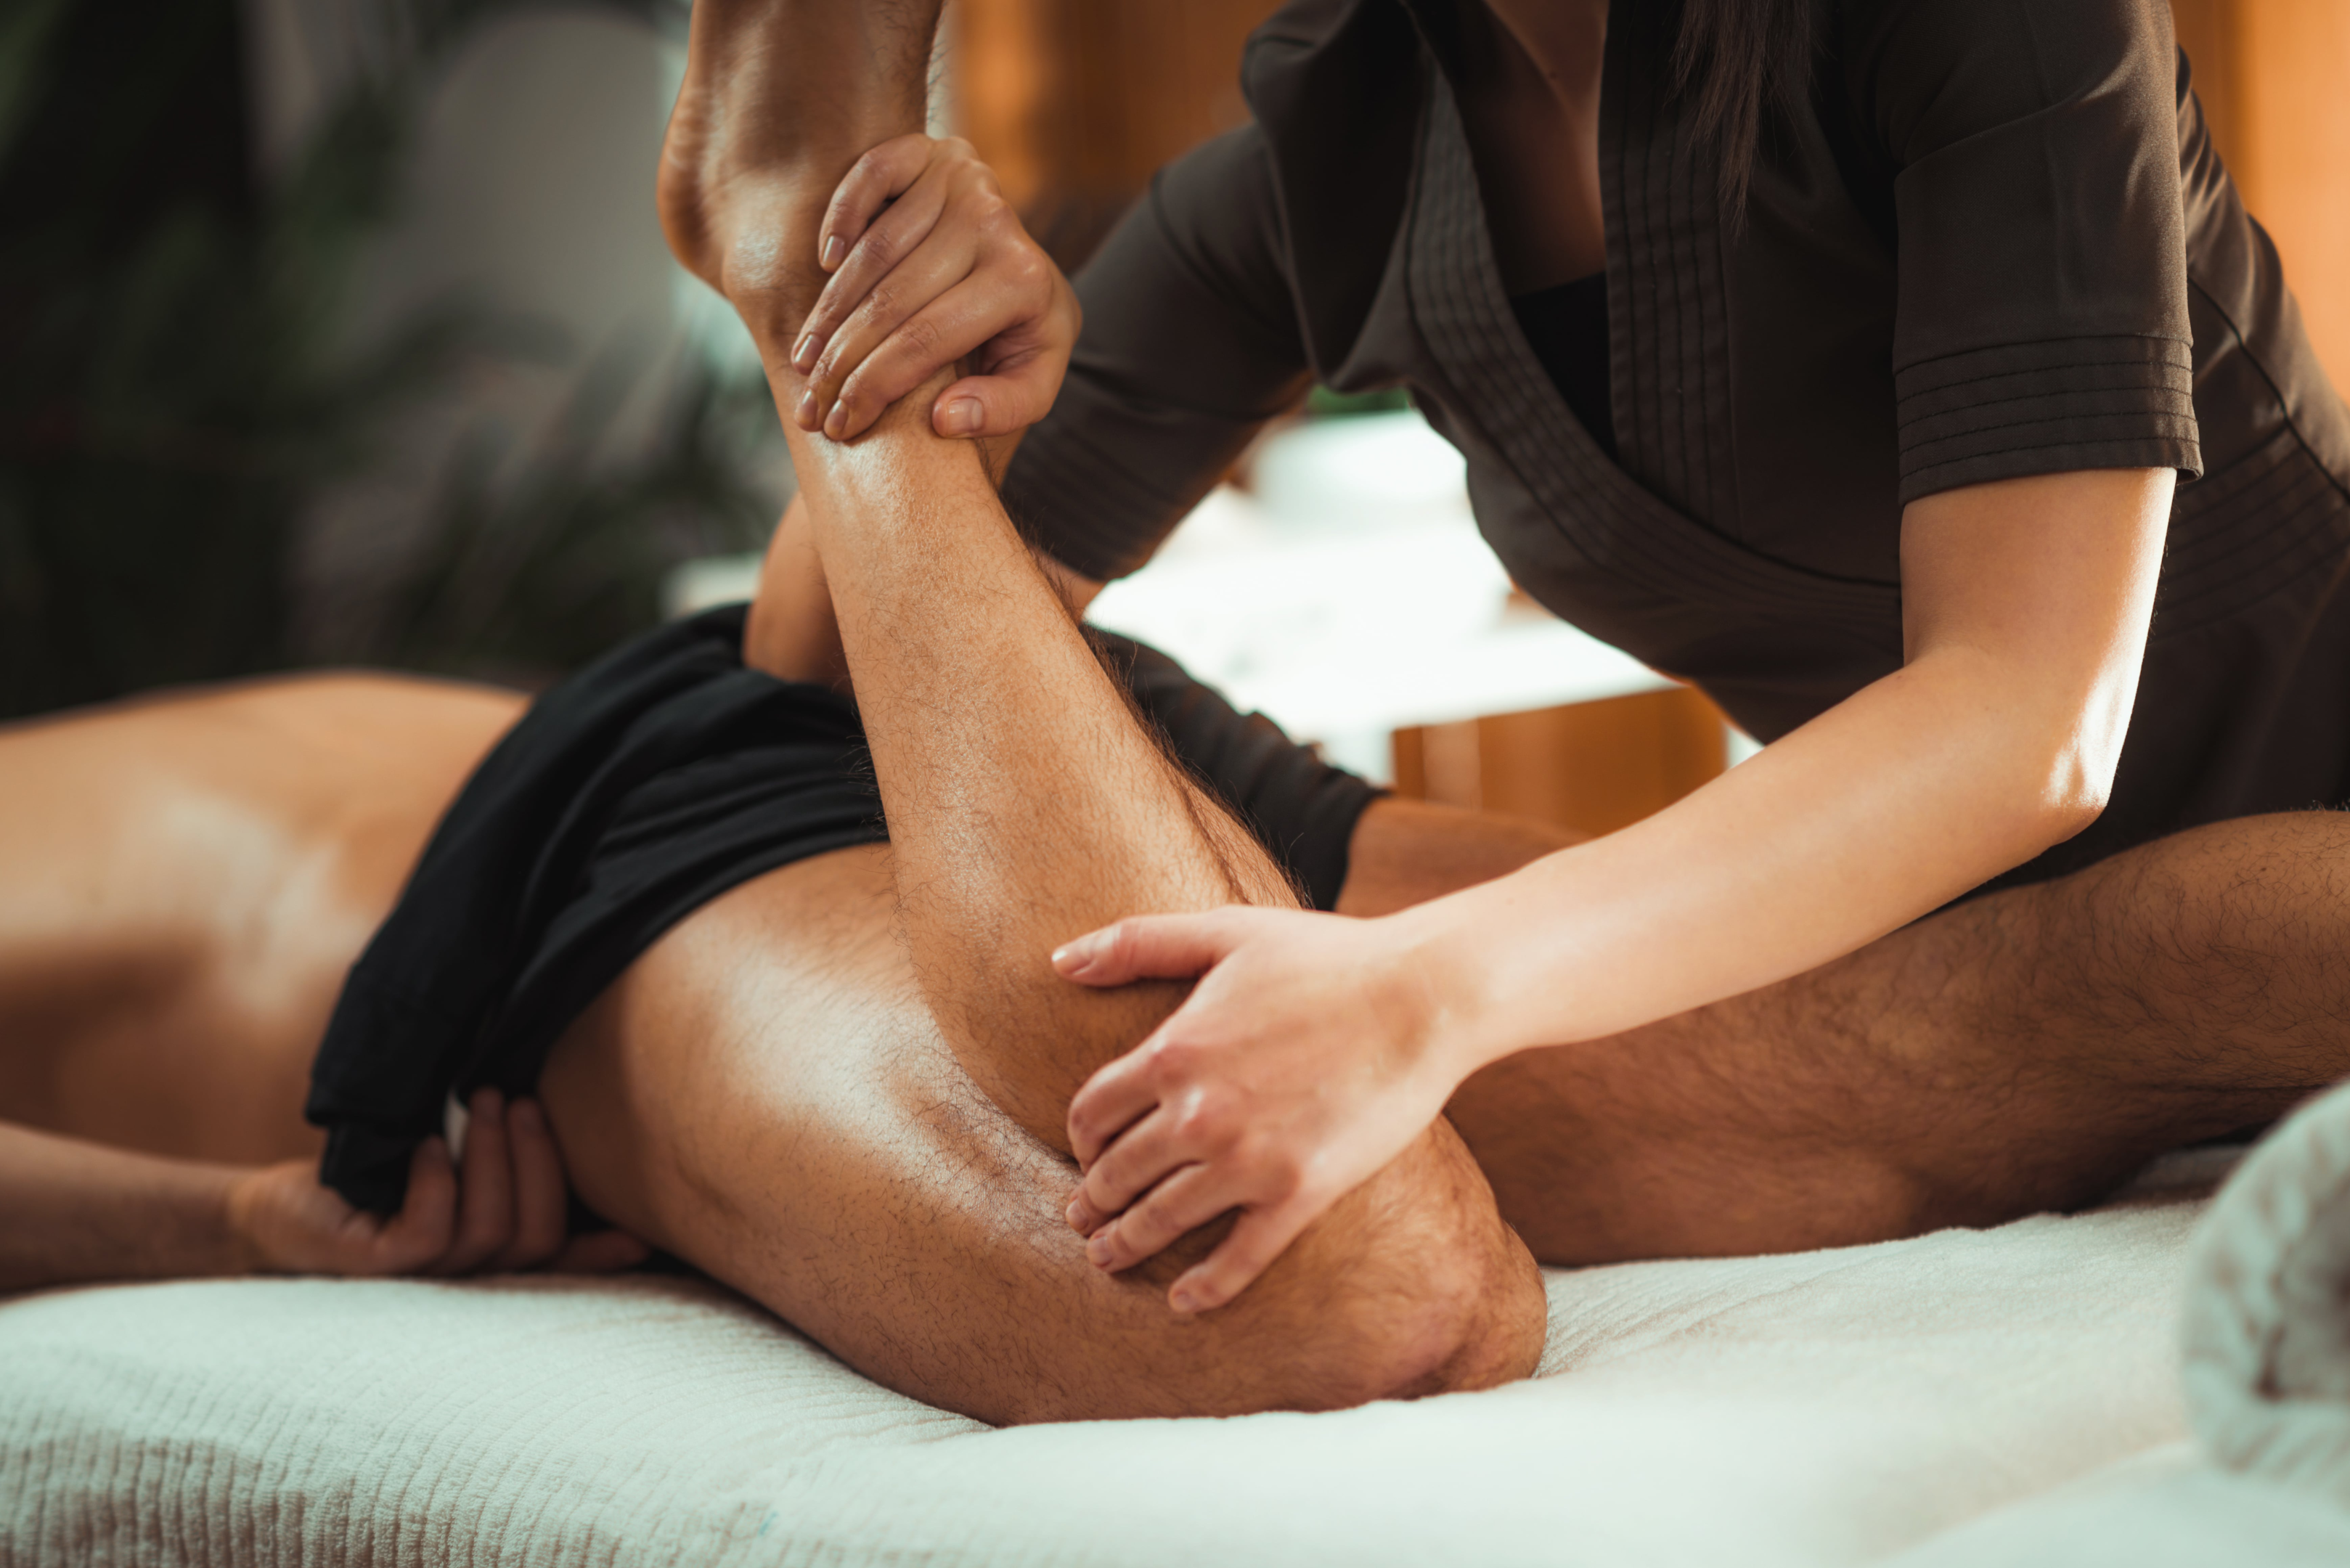 Burwood back pain, NSW, Massage Therapy, man lying on table having back and legs massage